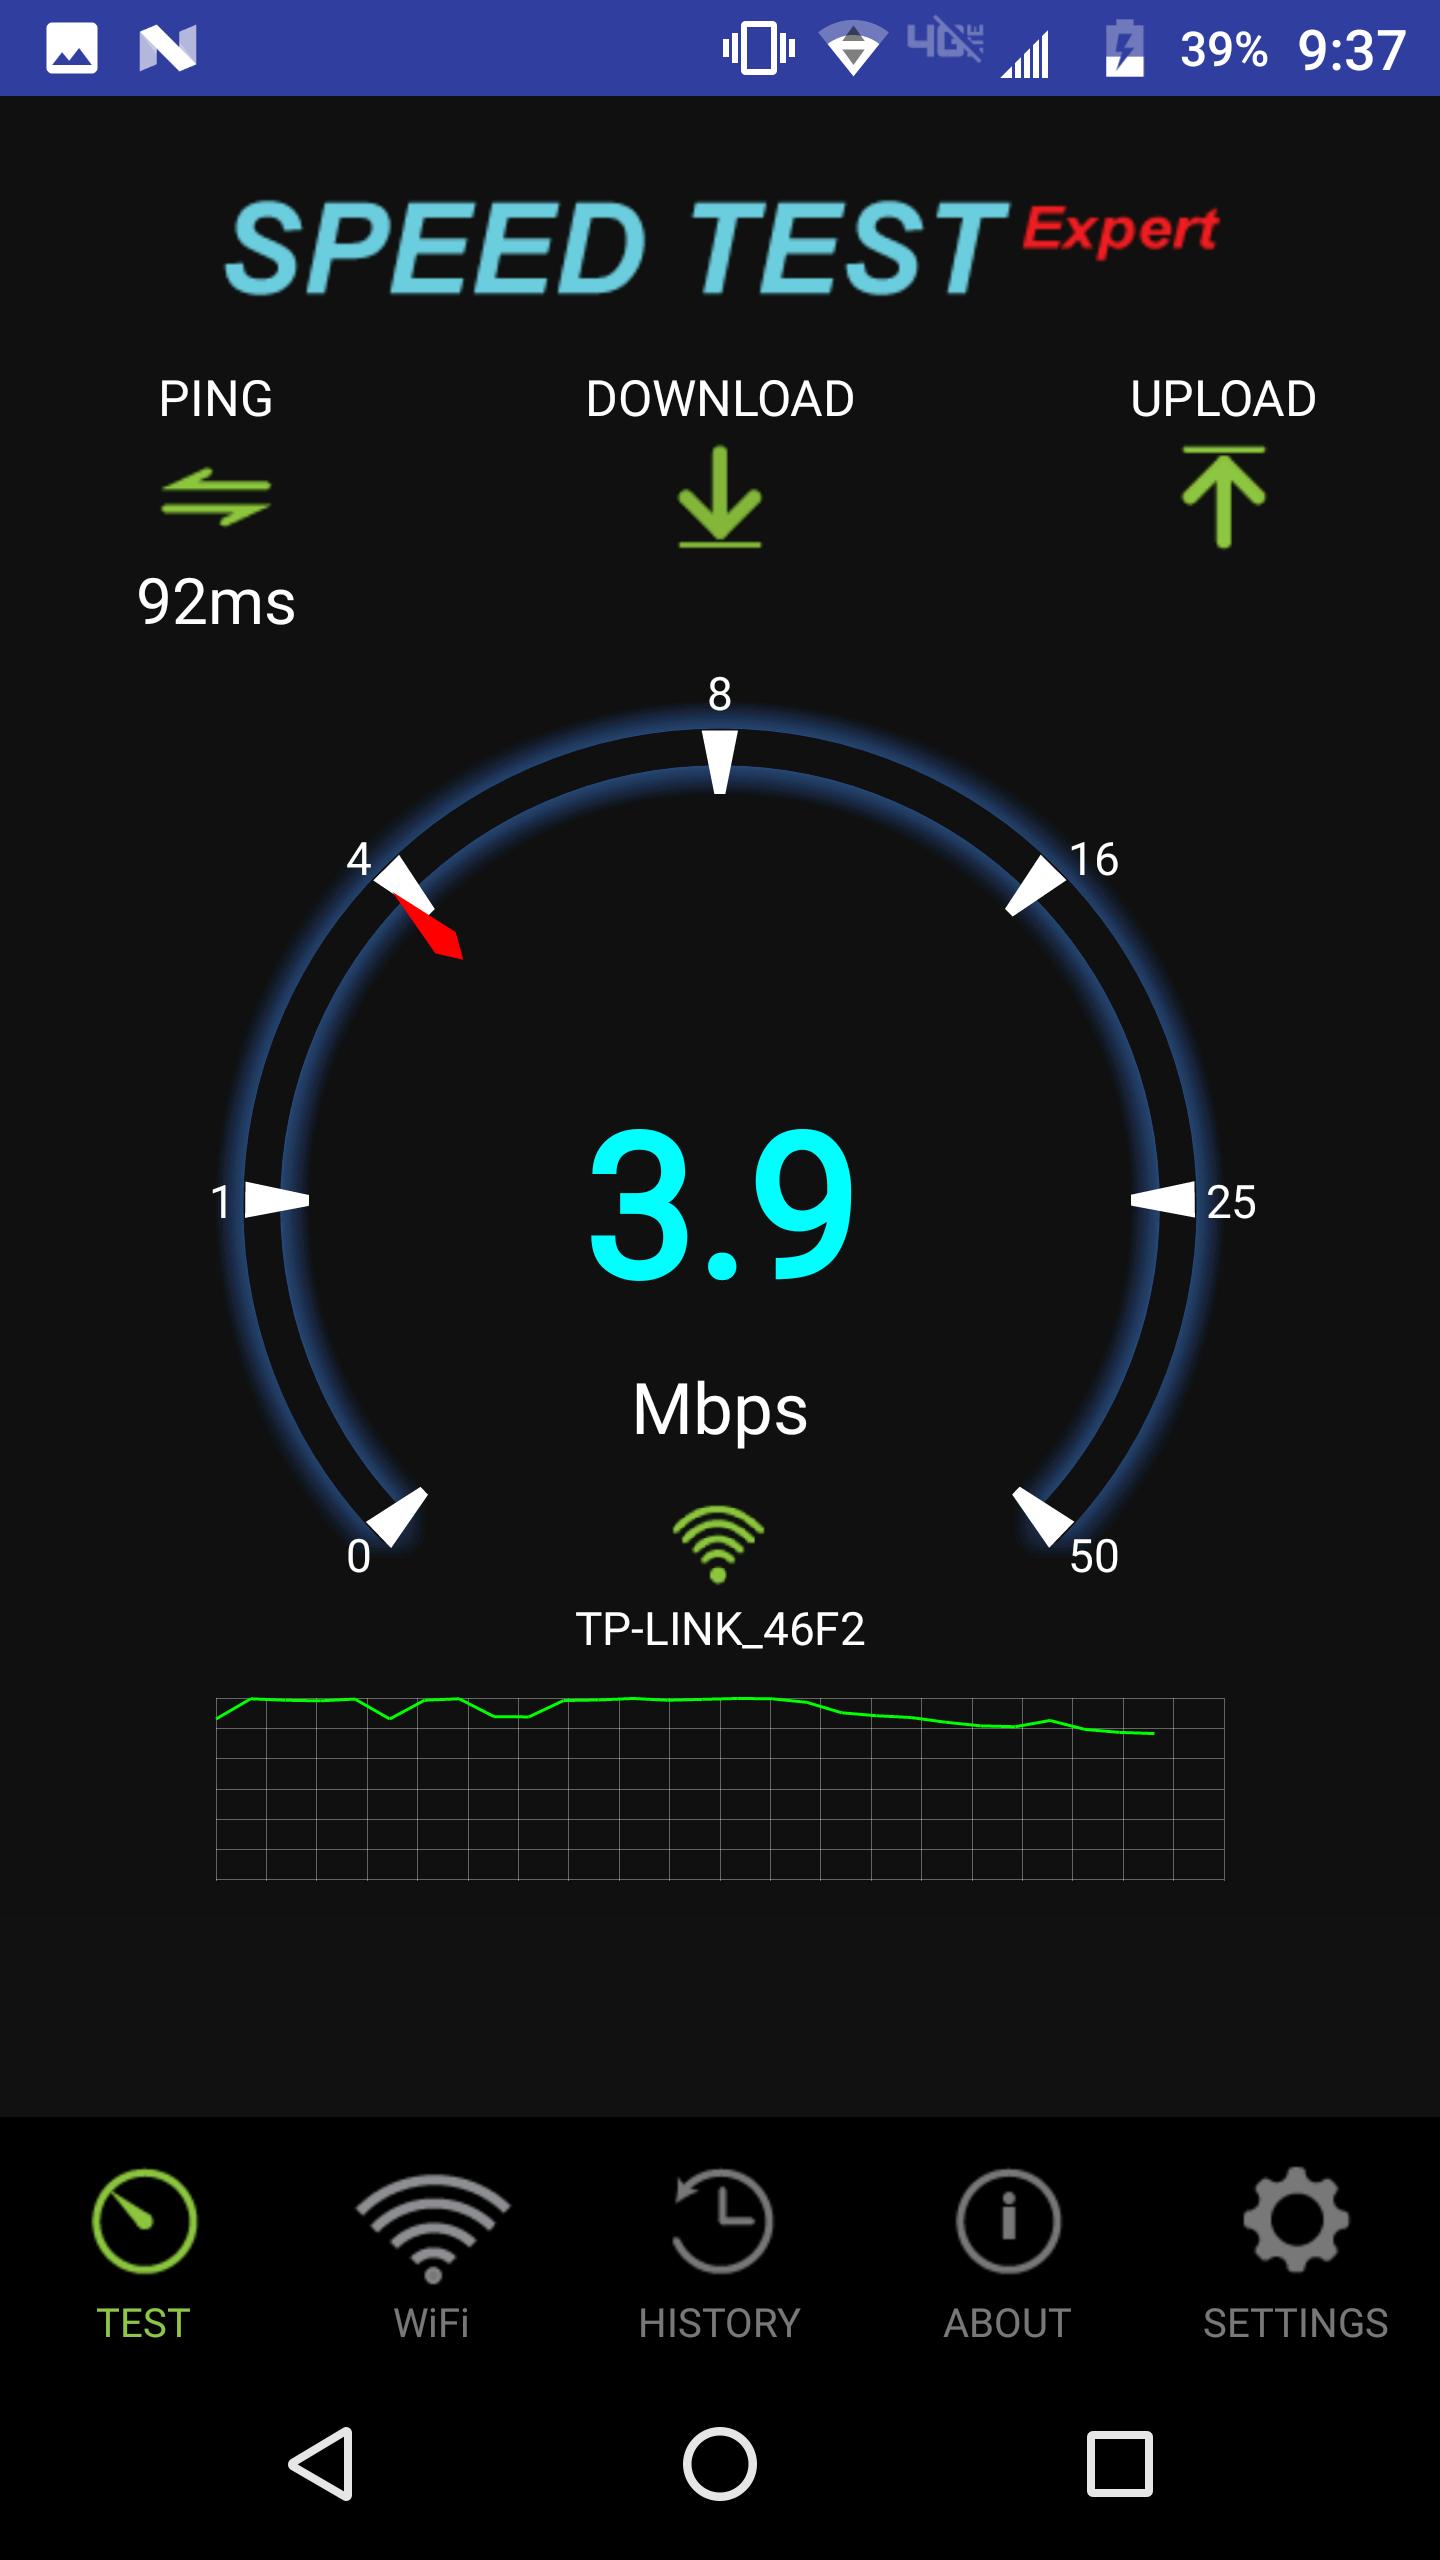 Speed Test Expert for Android - APK Download